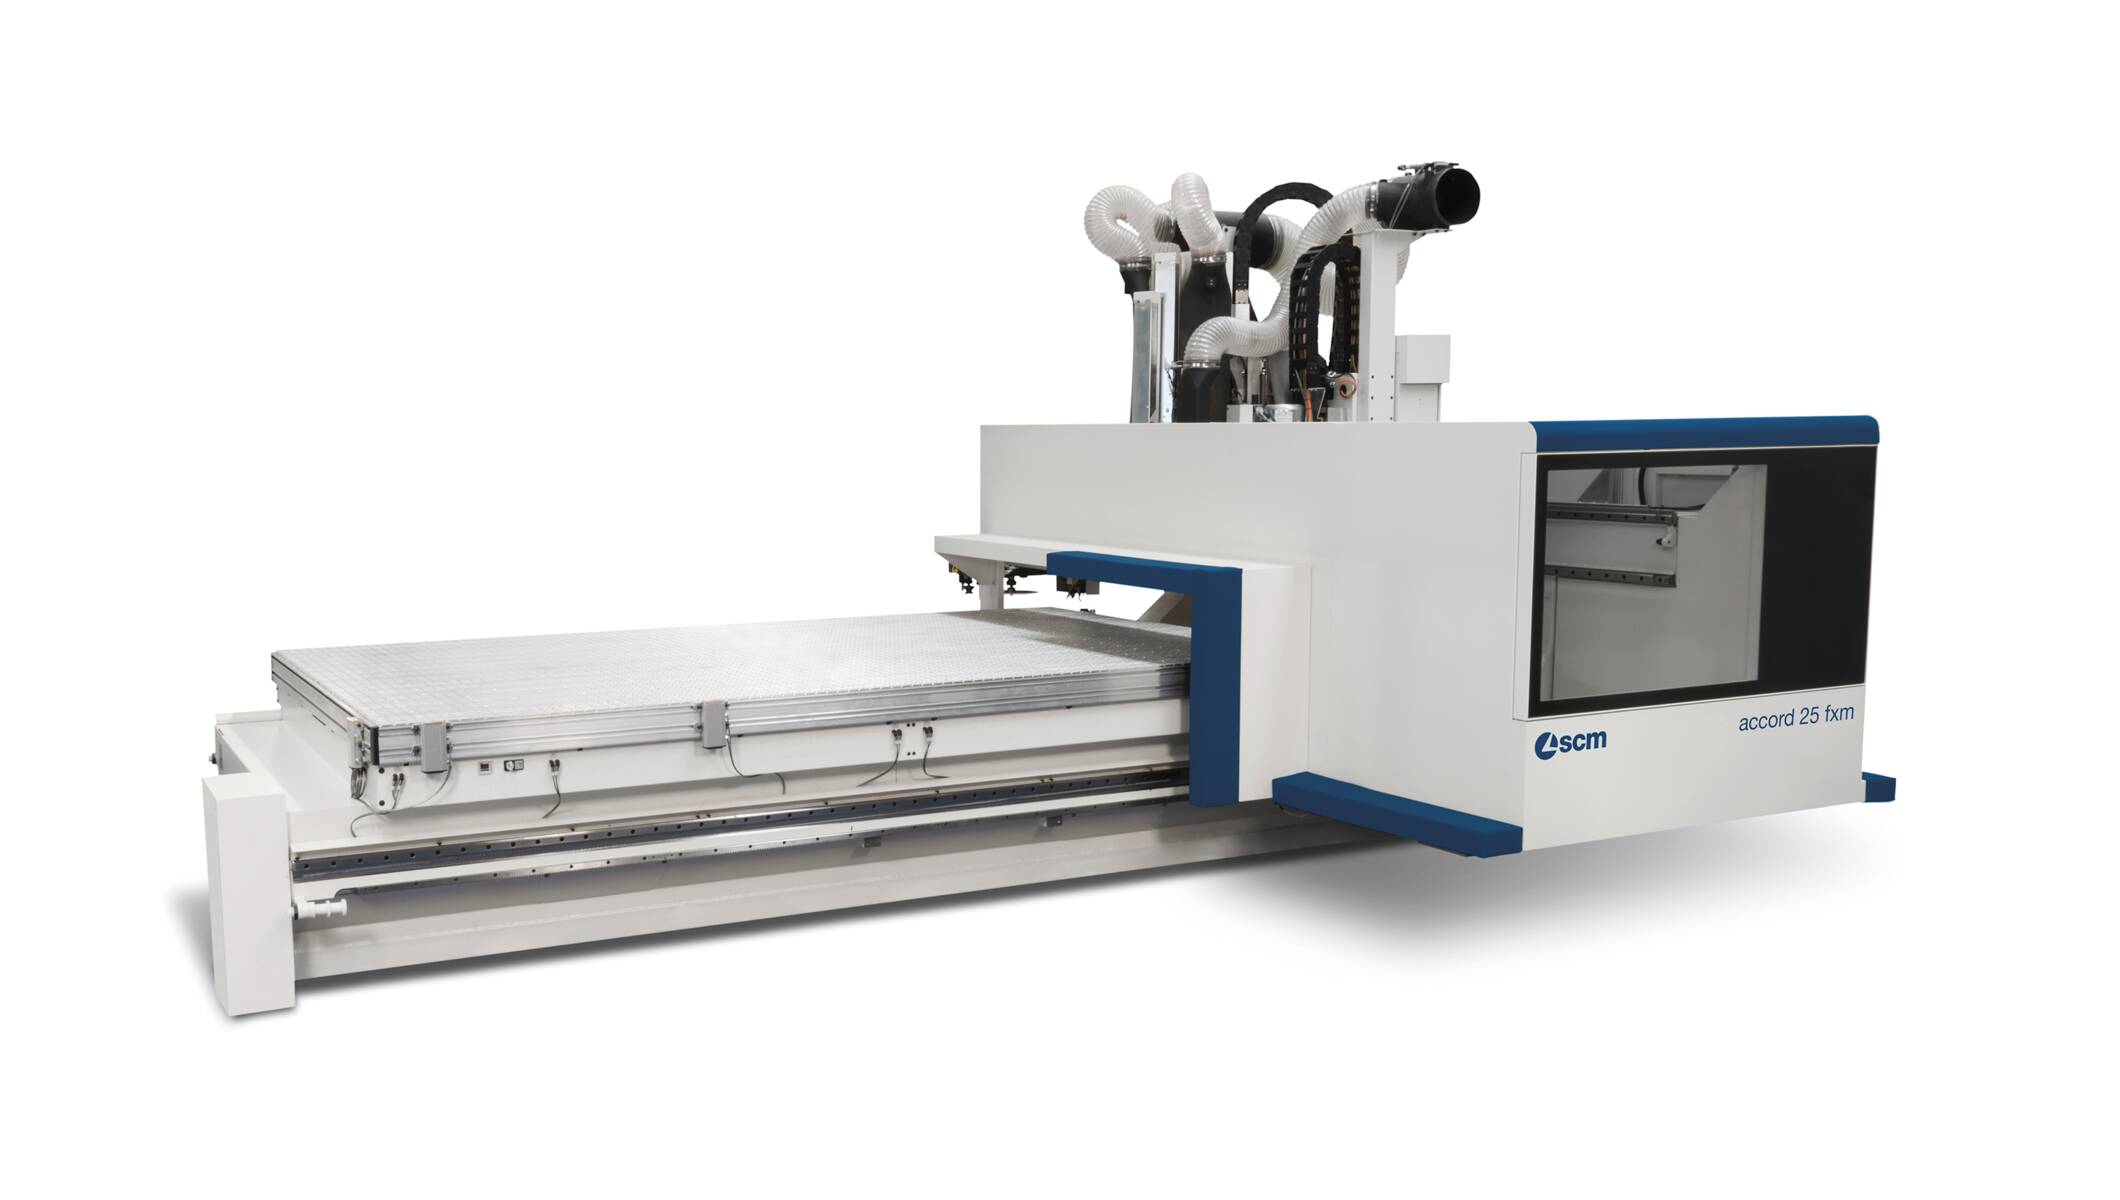 CNC Machining Centers - CNC Nesting Machining Centers for routing and drilling - accord 25 fxm